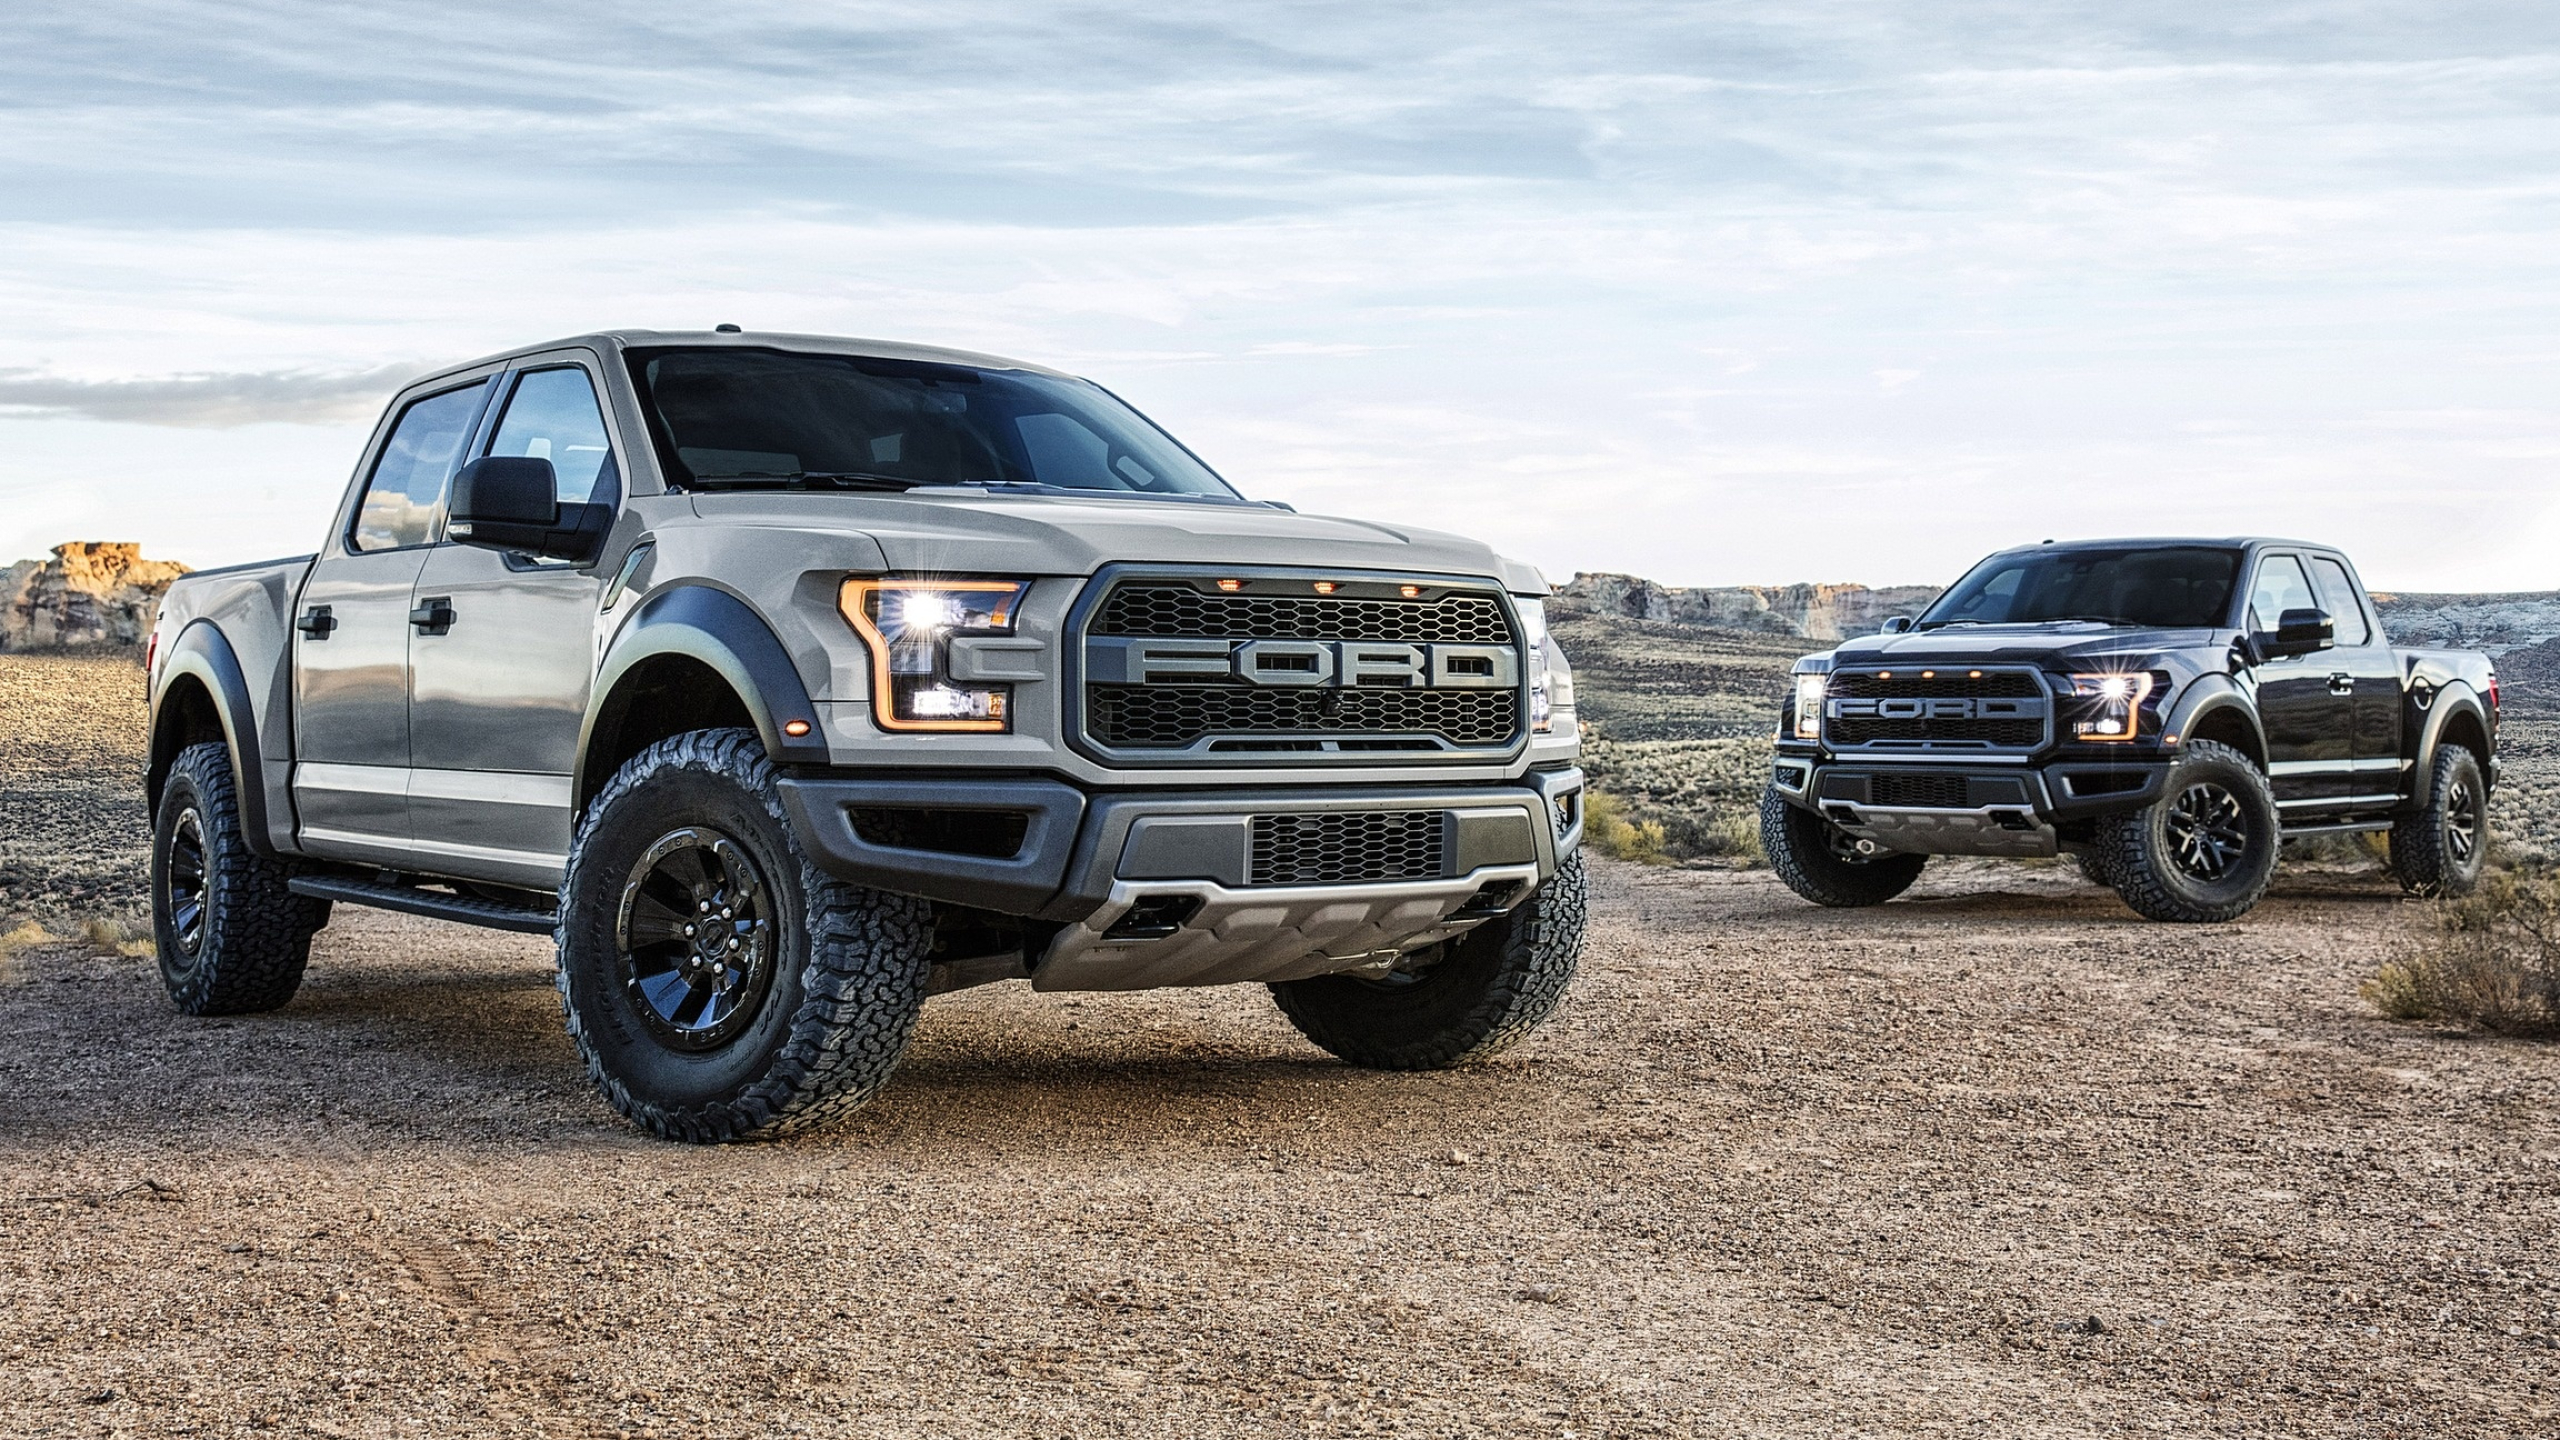 Ford Pickup: The F-Series has remained the best-selling truck line in the United States. 2560x1440 HD Background.